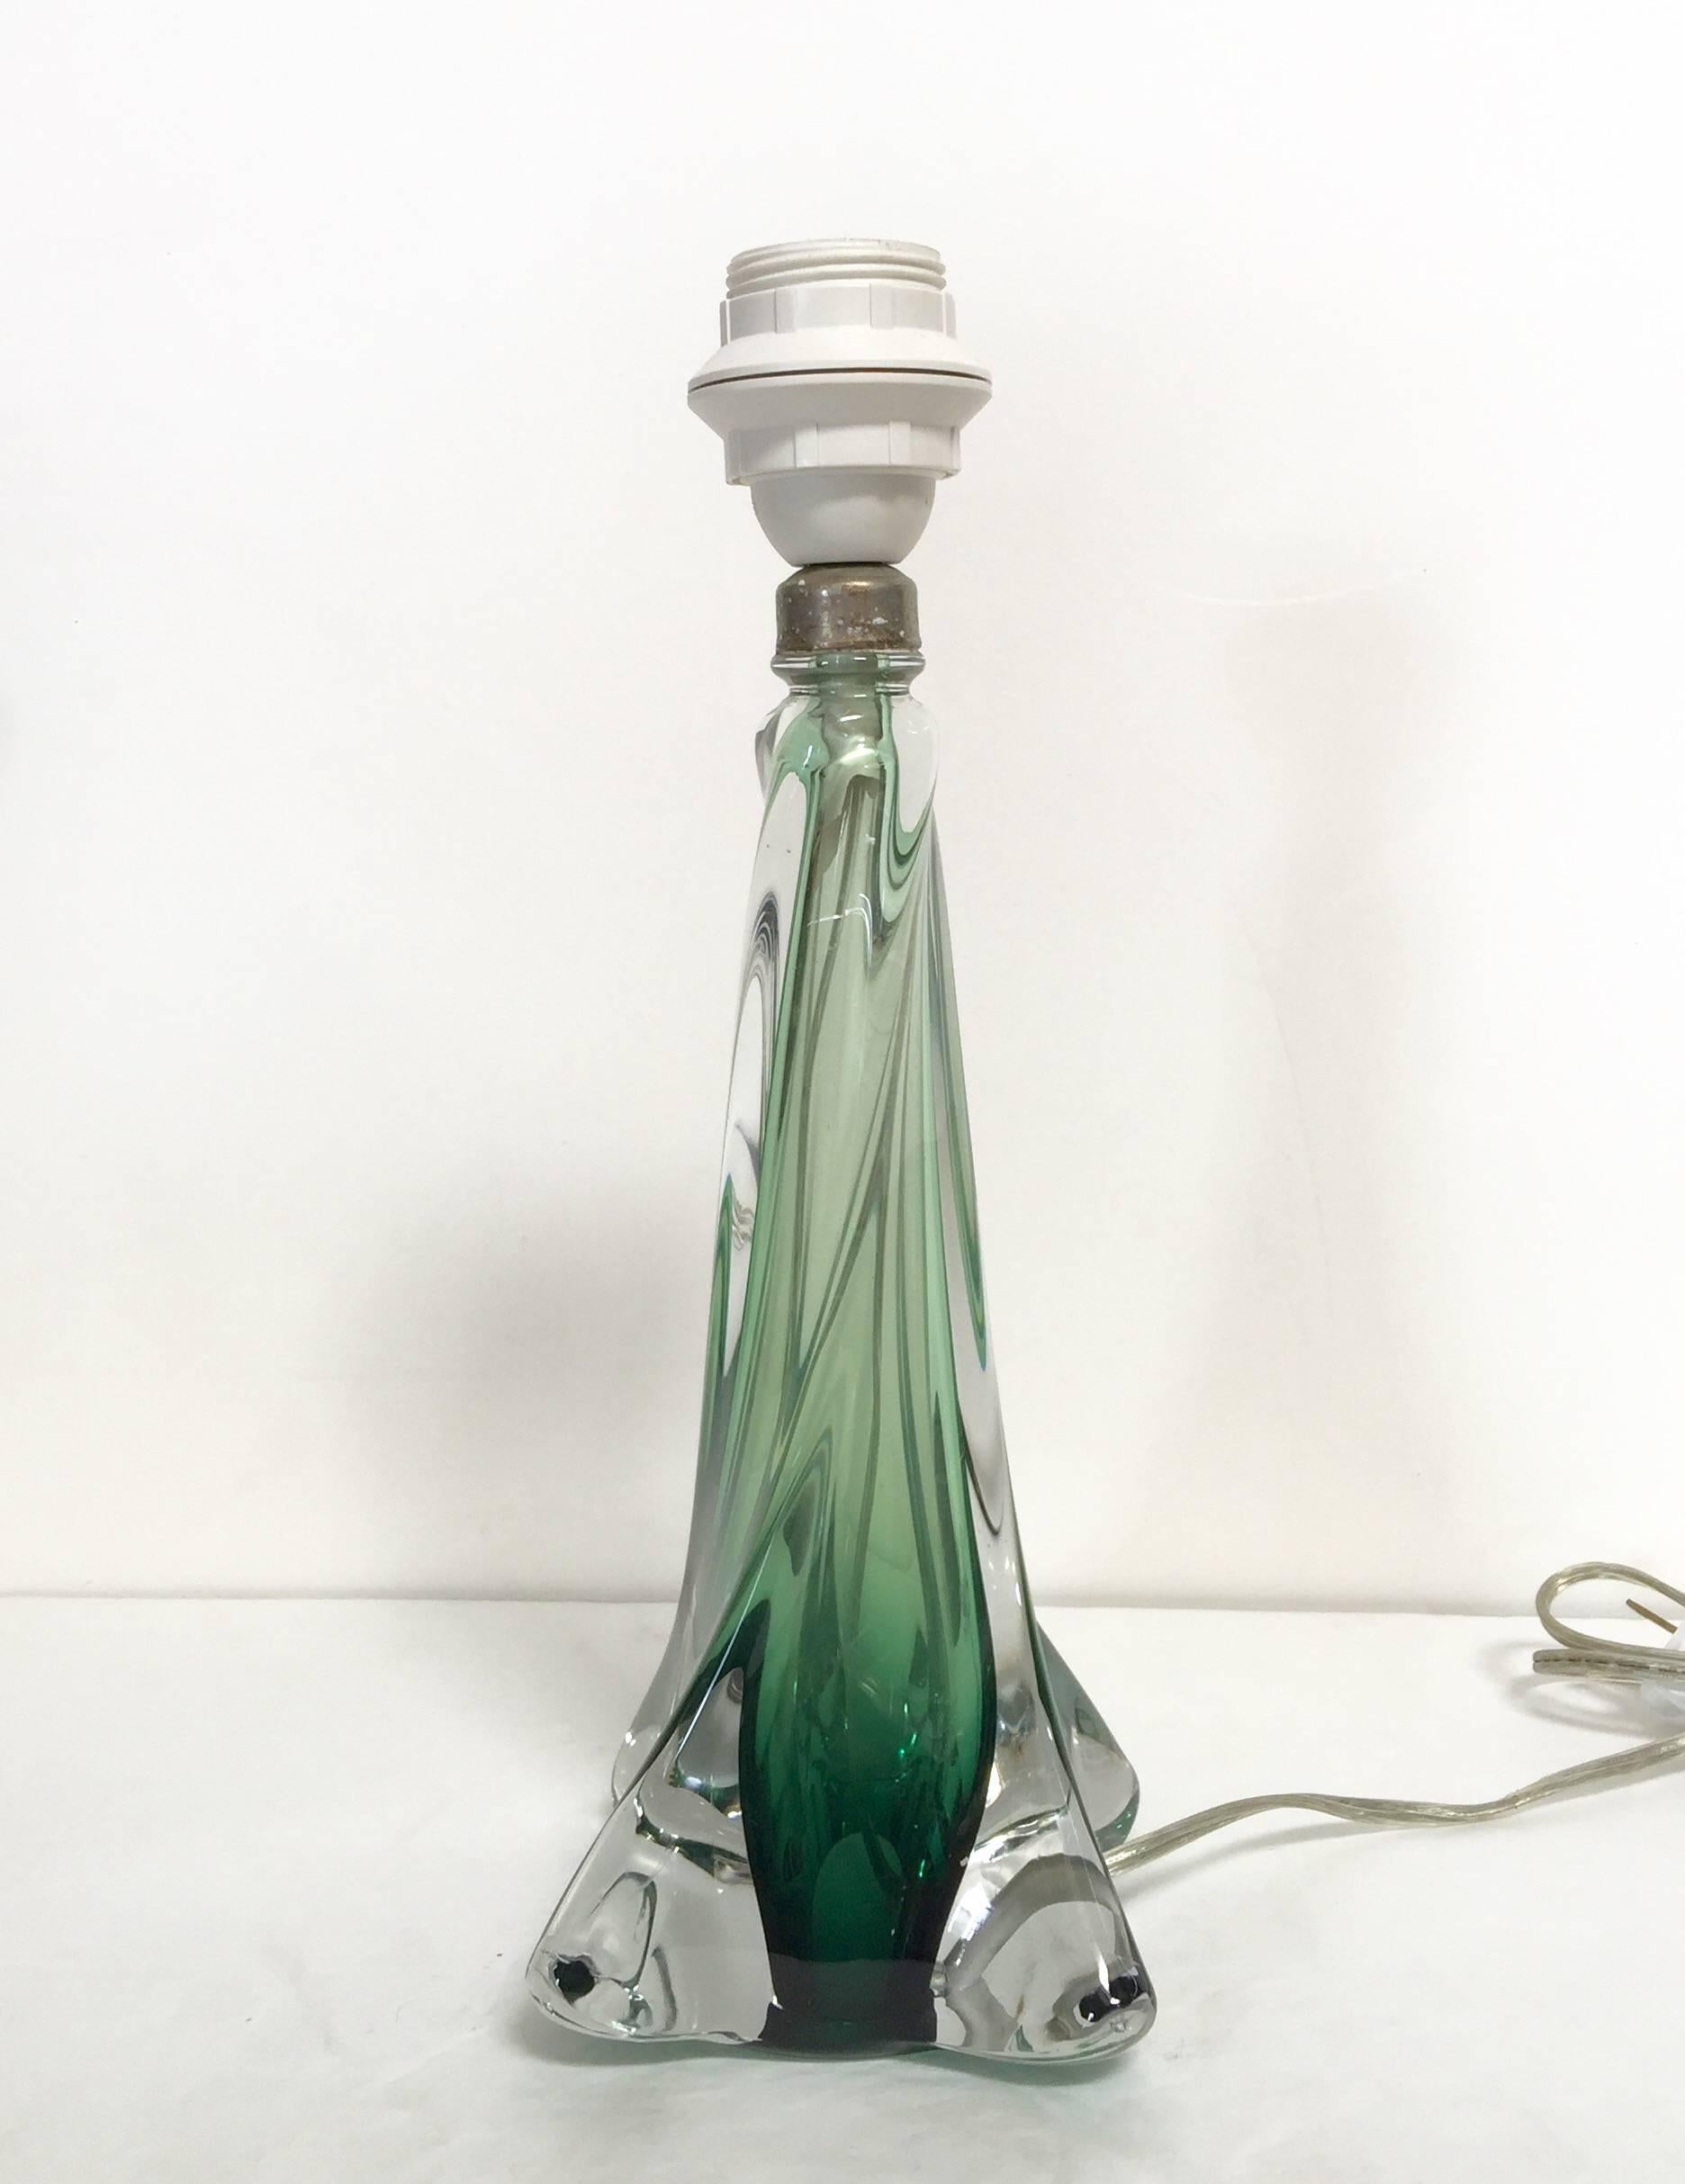 Original vintage green Murano glass table lamp / Made in Italy in the 1960s.
Height: 11 inches / Diameter 5.5 inches
1 light / E26 or E27 type / max 60W each
1 in stock in Palm Springs ON FINAL CLEARANCE SALE for $399 !!
Order Reference #: FABIOLTD